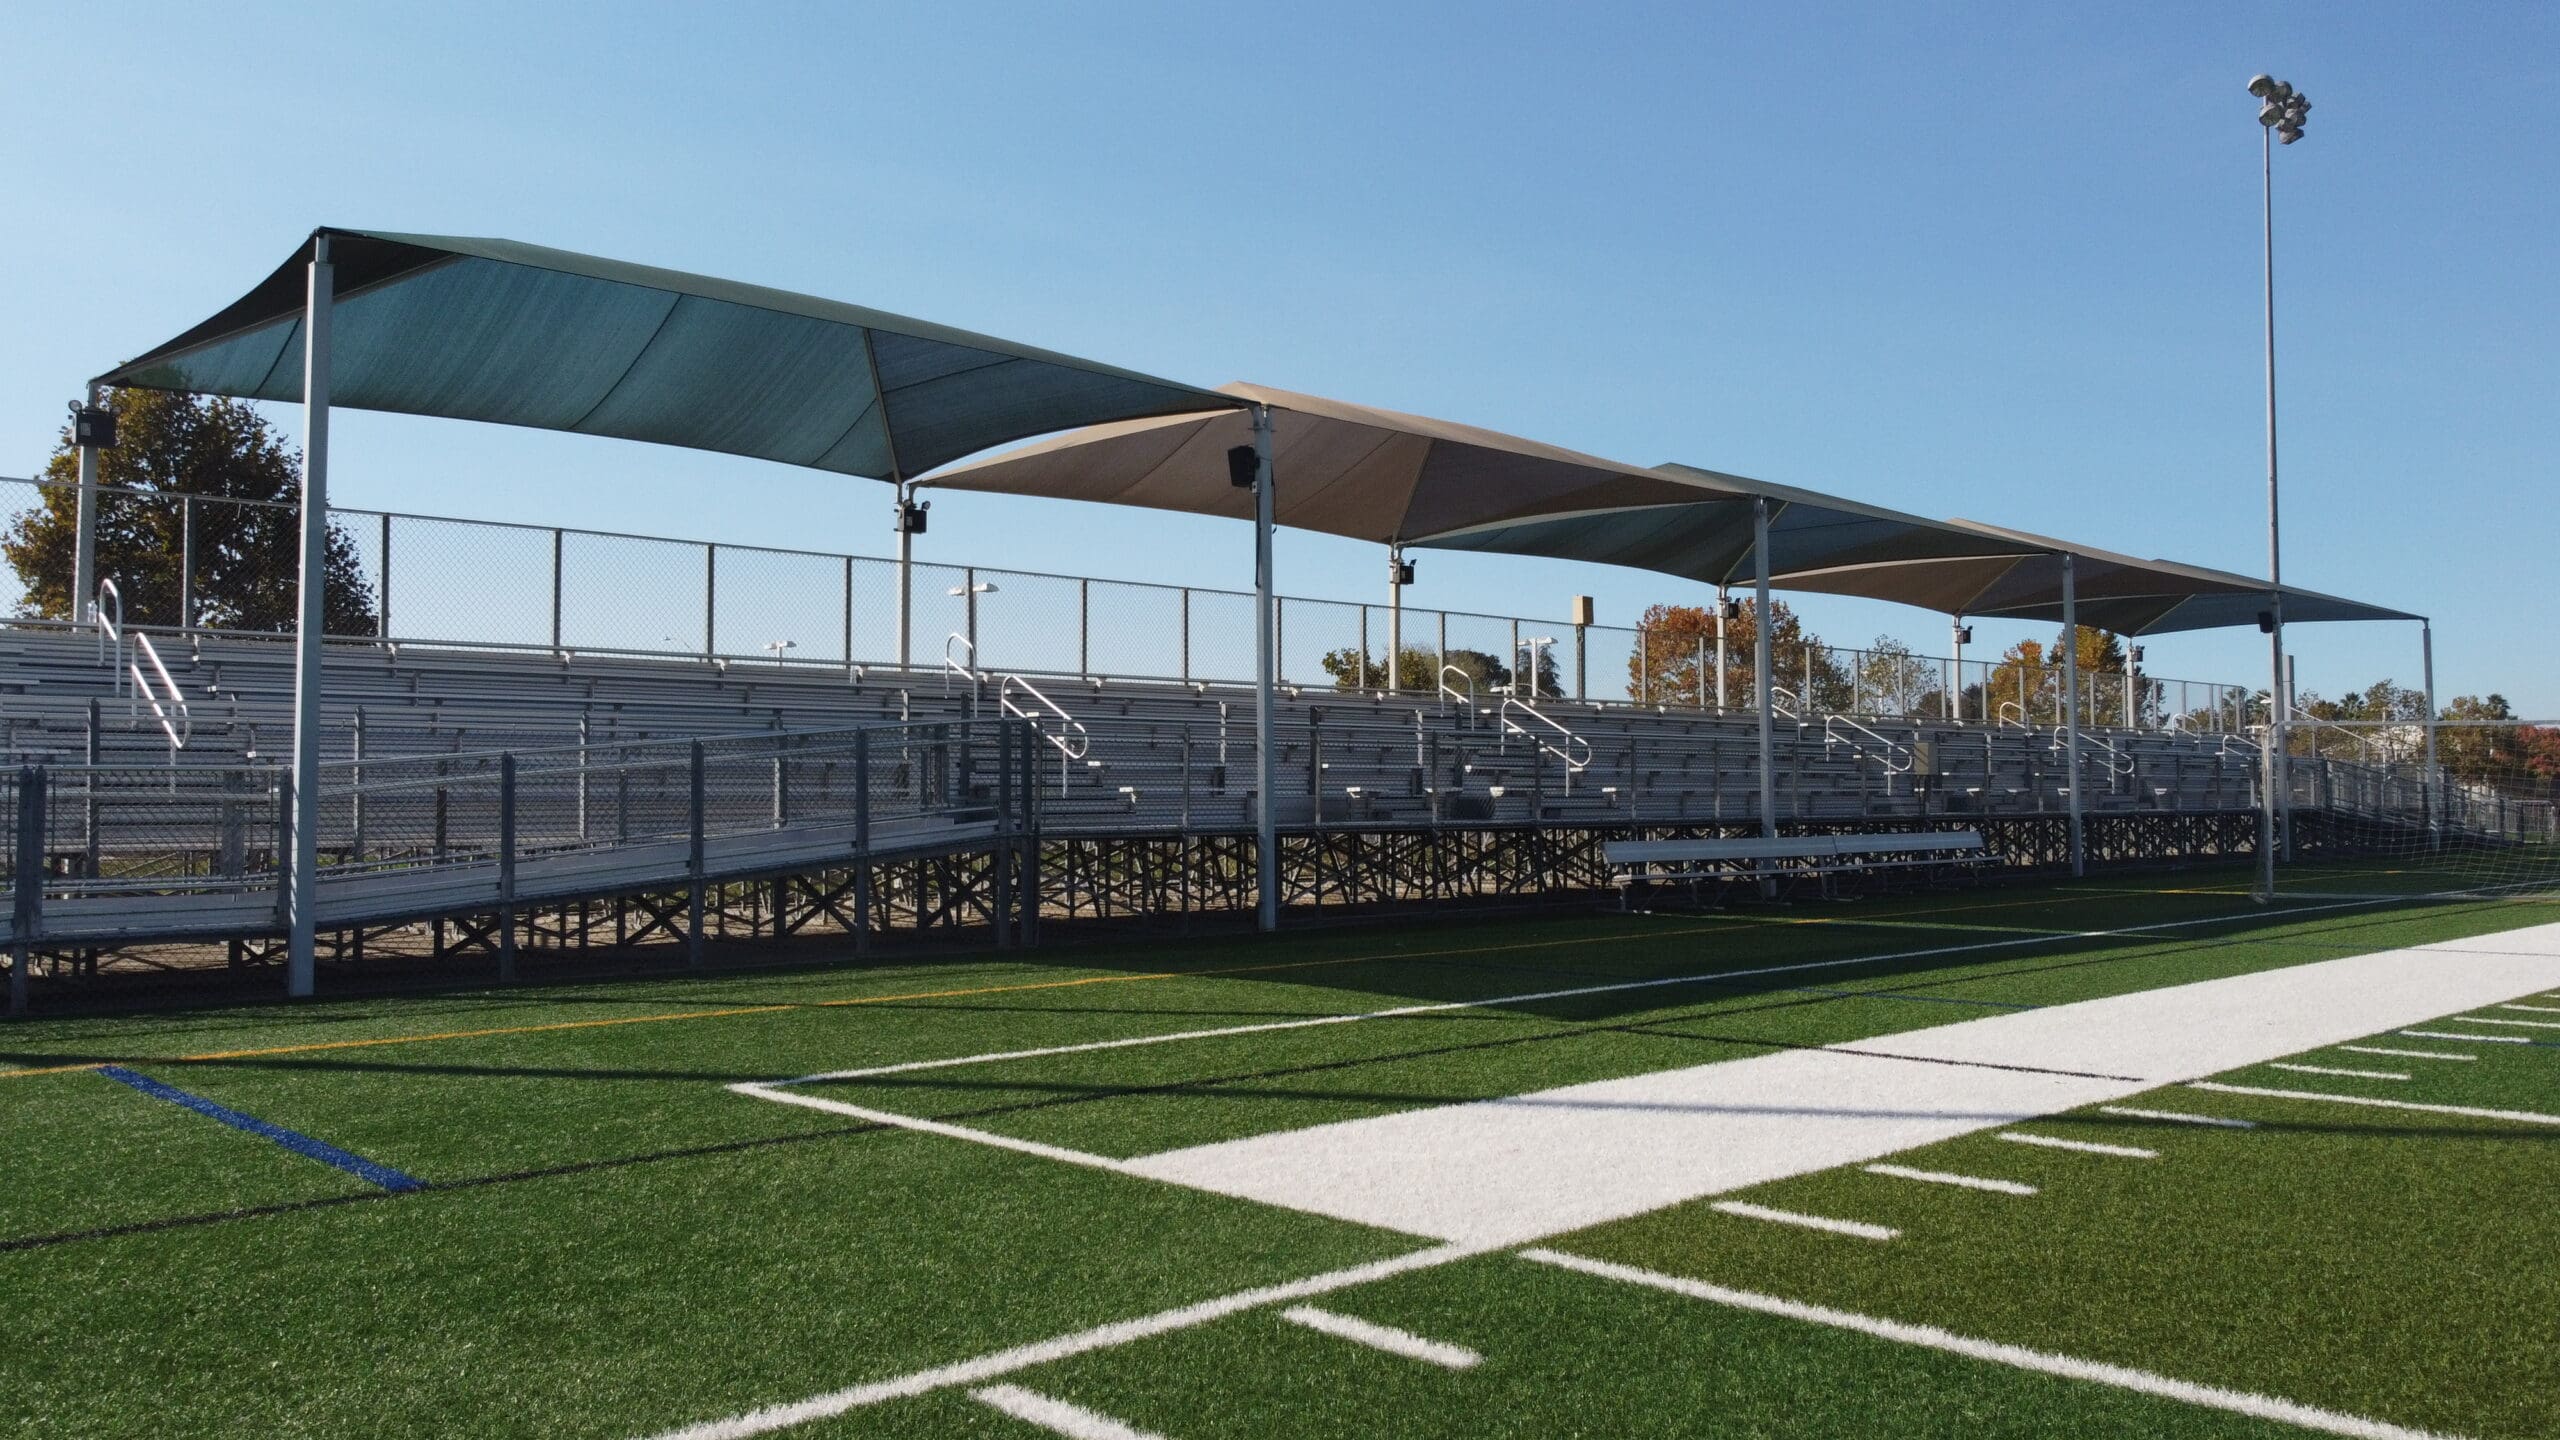 USA SHADE fabric shade structure over sports bleachers